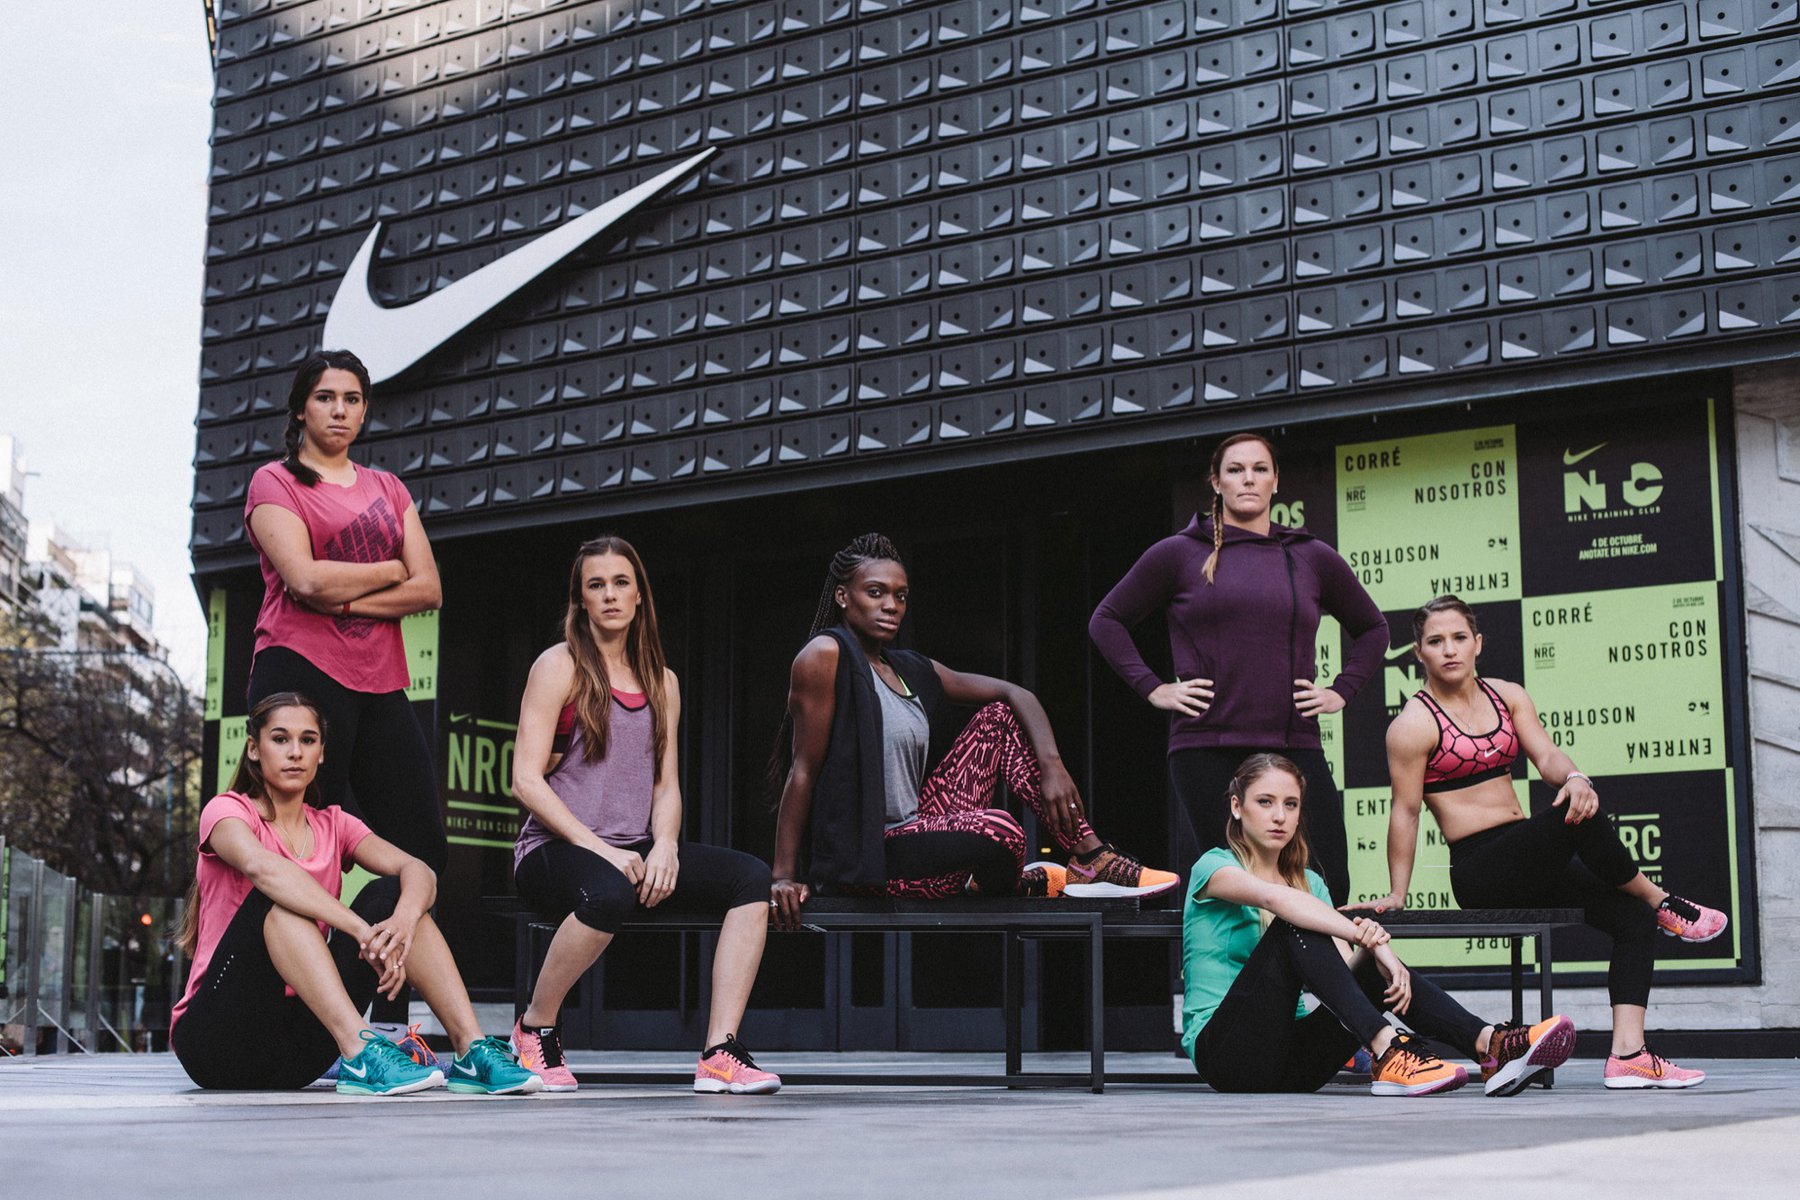 Apply Nike by Sales Associate Part-Time ("Athlete")